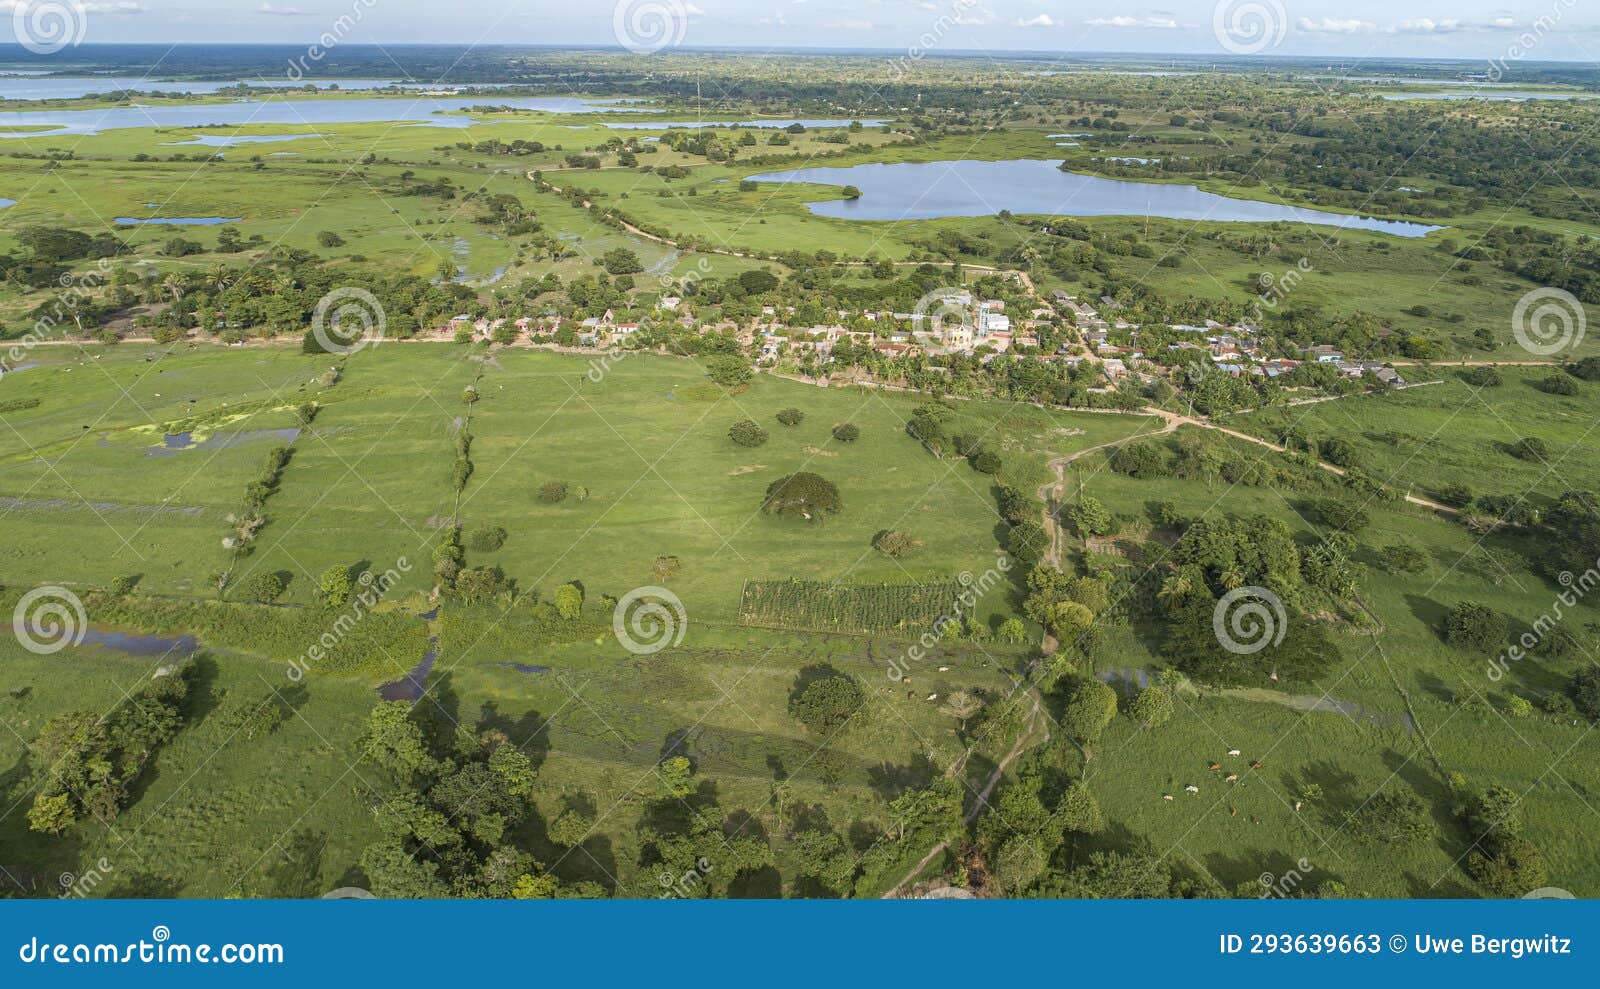 areal view of green rural landscape with lakes and waterways near mompos, colombia